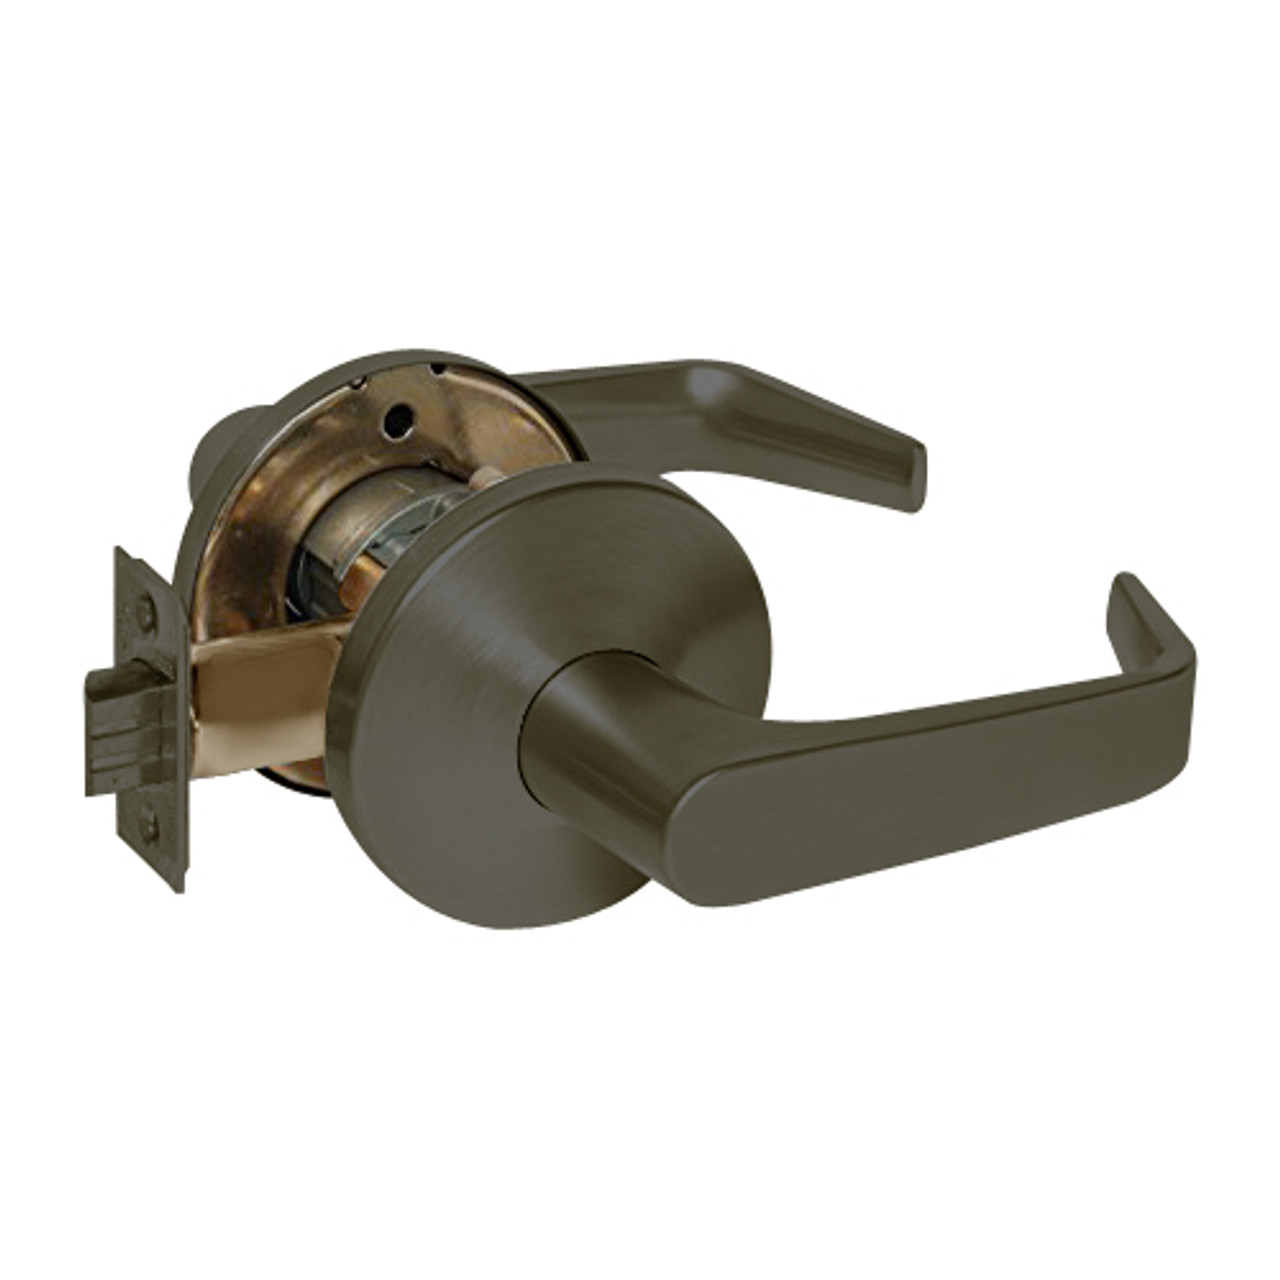 9K30NX15LS3613 Best 9K Series Passage Heavy Duty Cylindrical Lever Locks with Contour Angle with Return Lever Design in Oil Rubbed Bronze